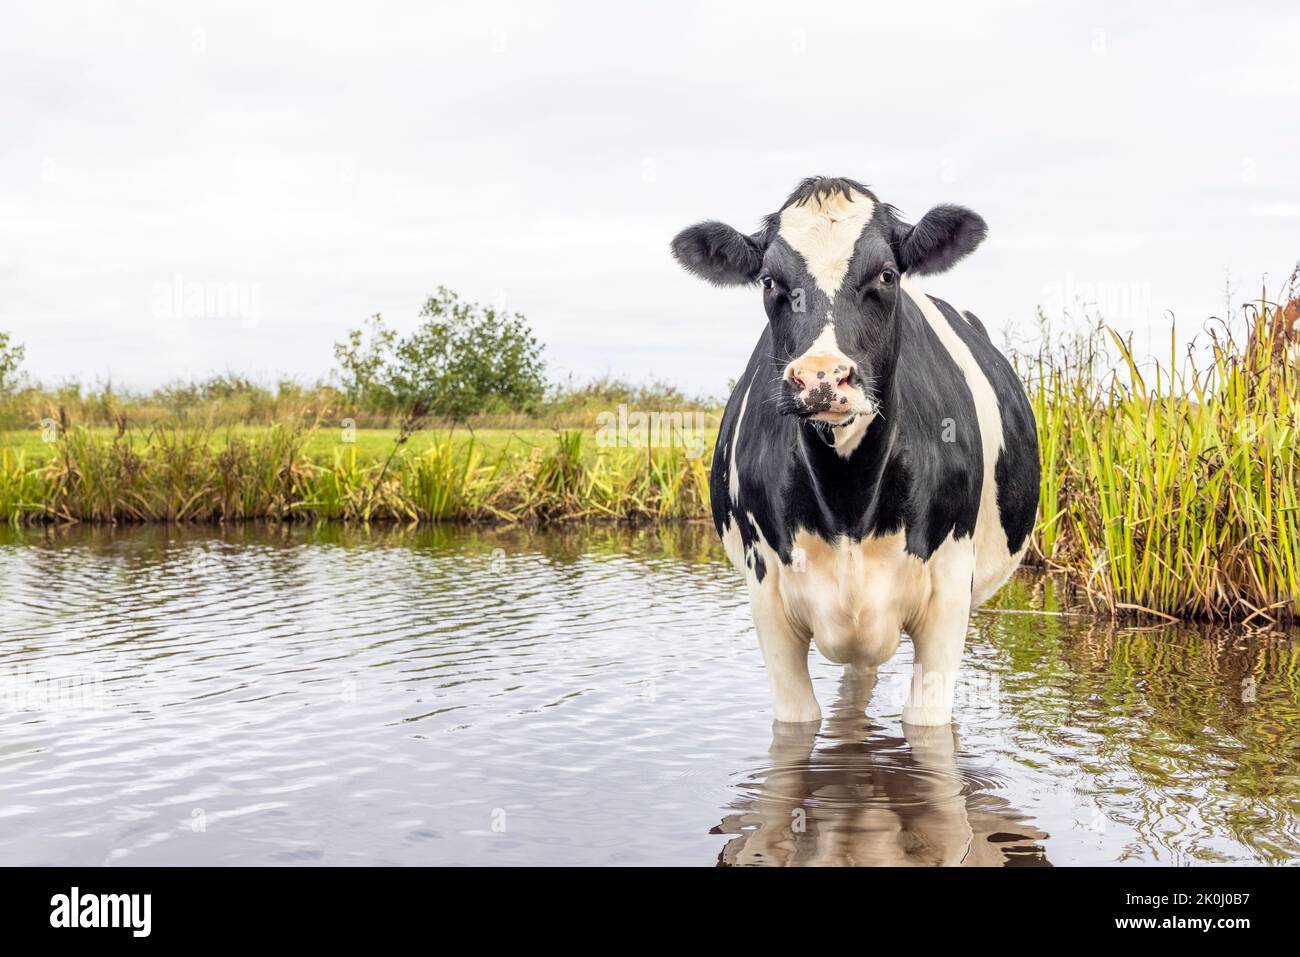 Cow cooling down, going to swim, taking a bath and standing in a creek, looking nosy, reflection in the water, Stock Photo